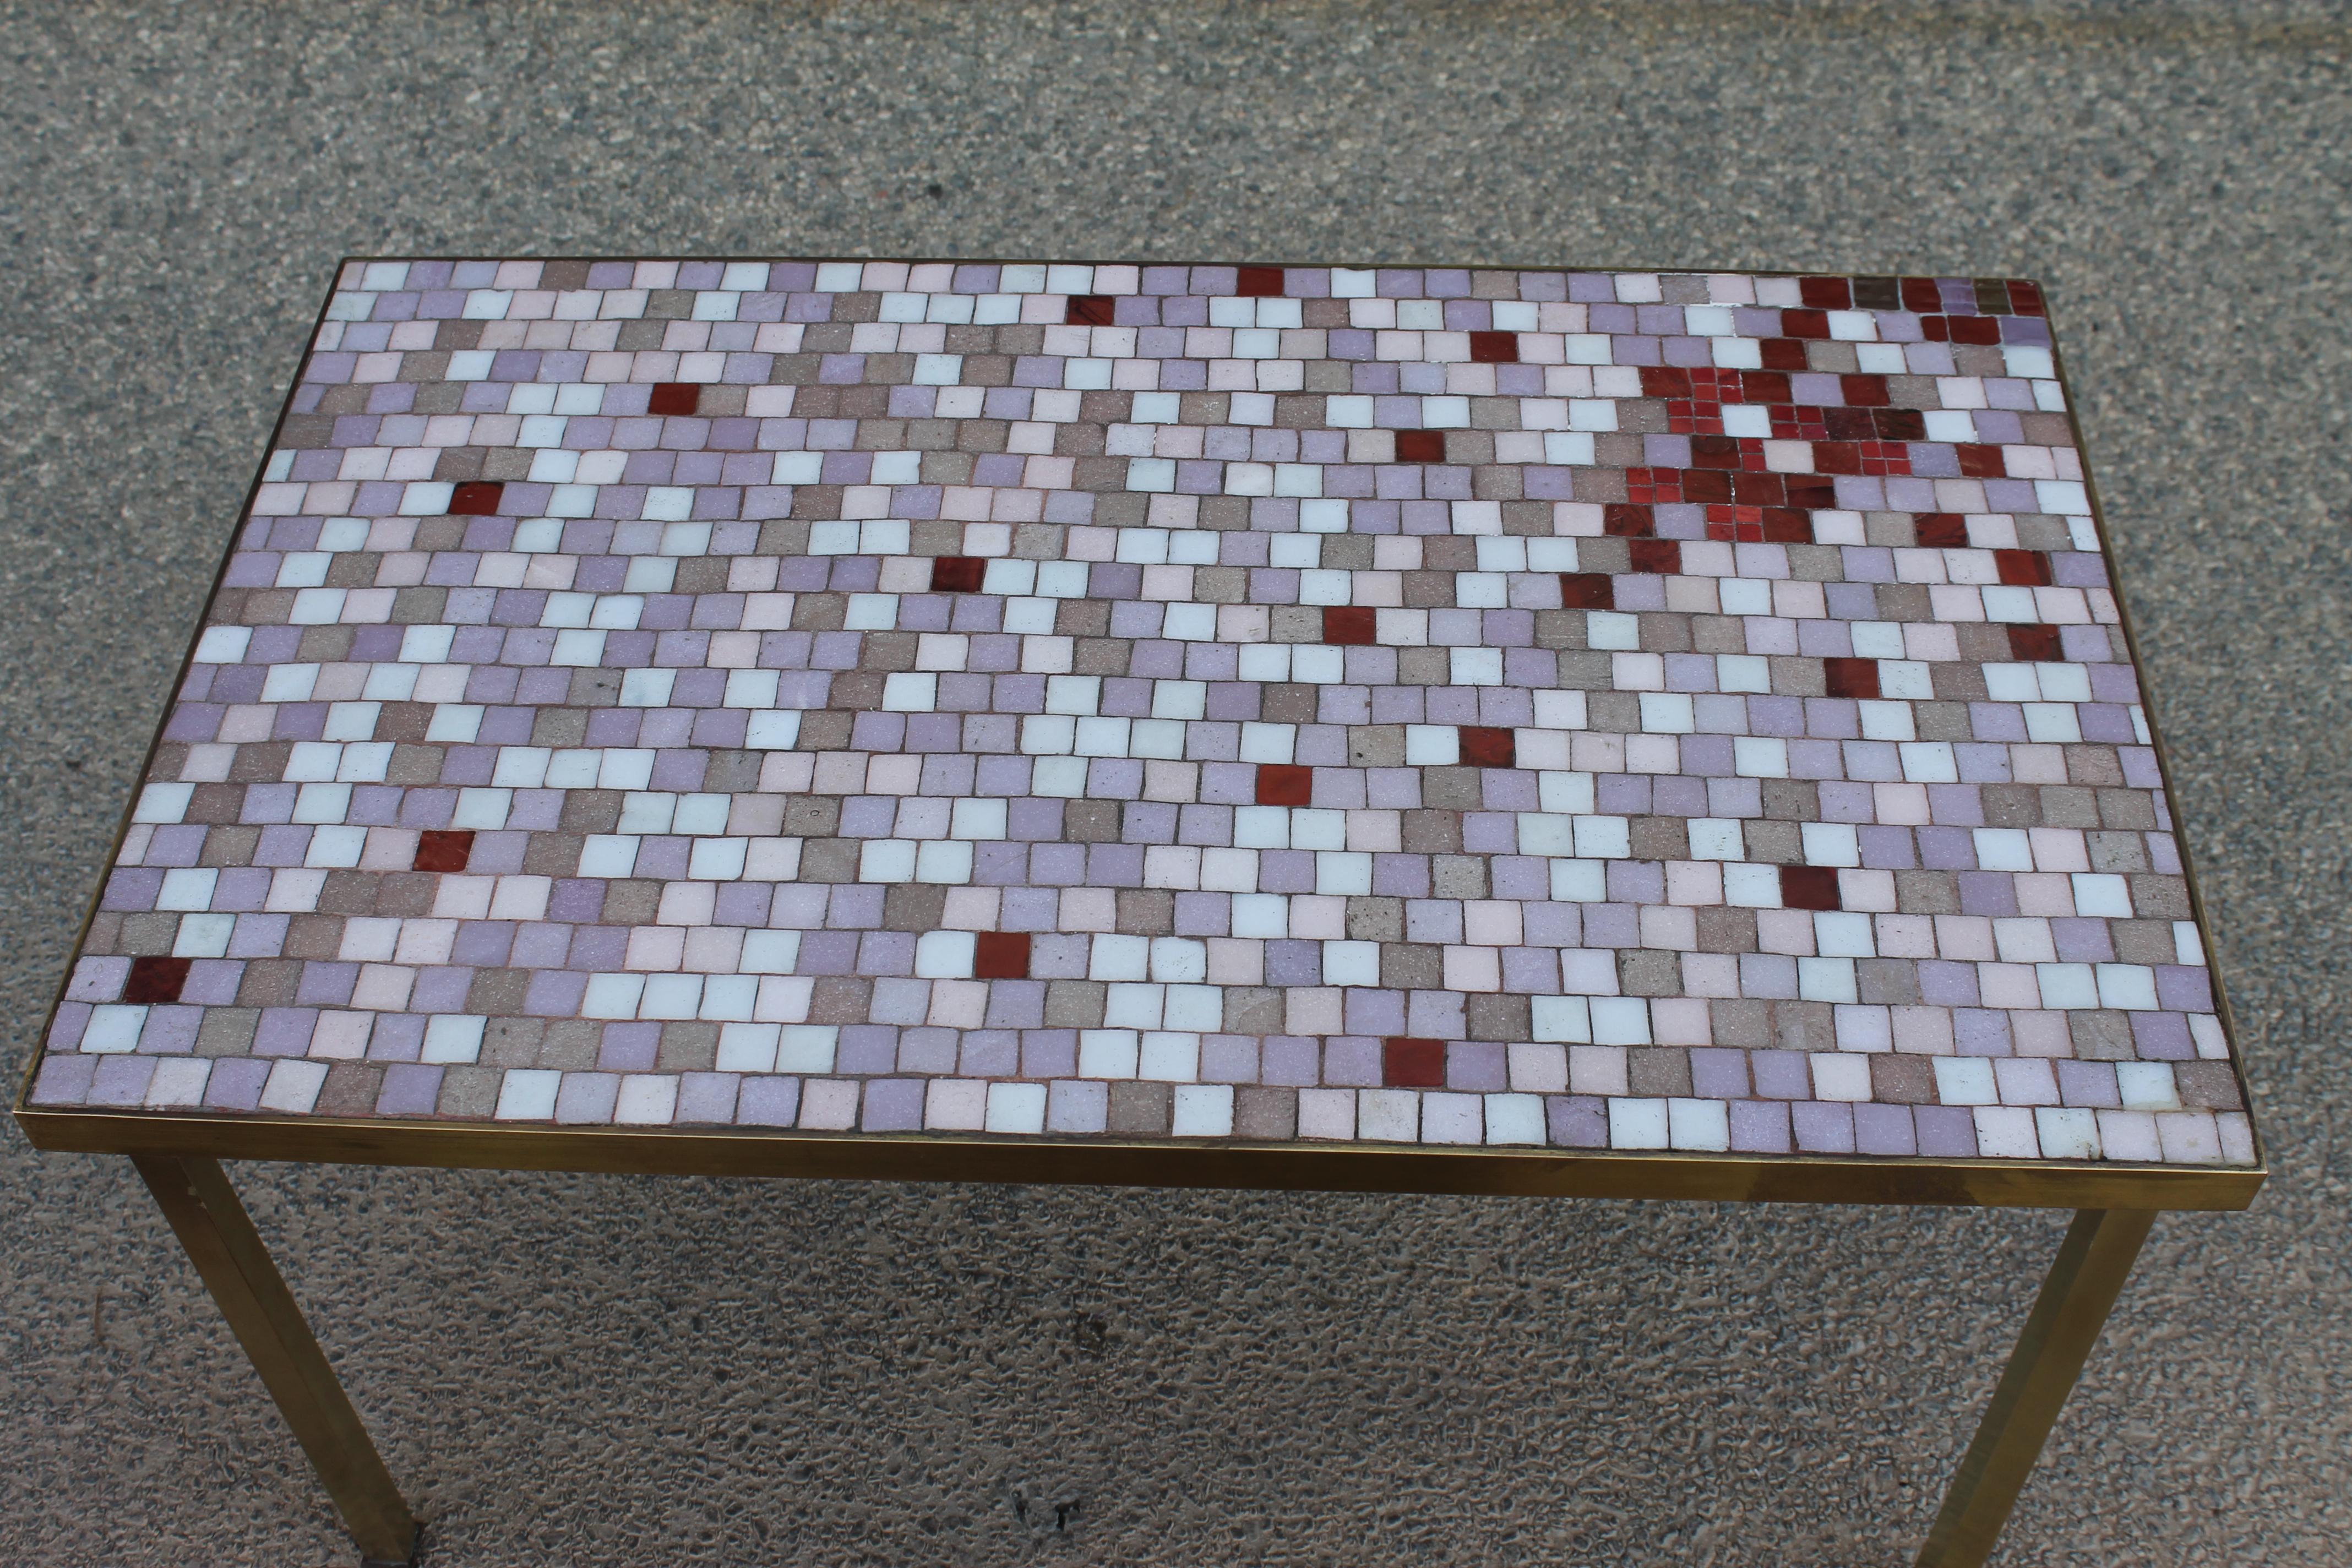 Pair of Italian Glass Tile Tables in the style of Harvey Probber 1